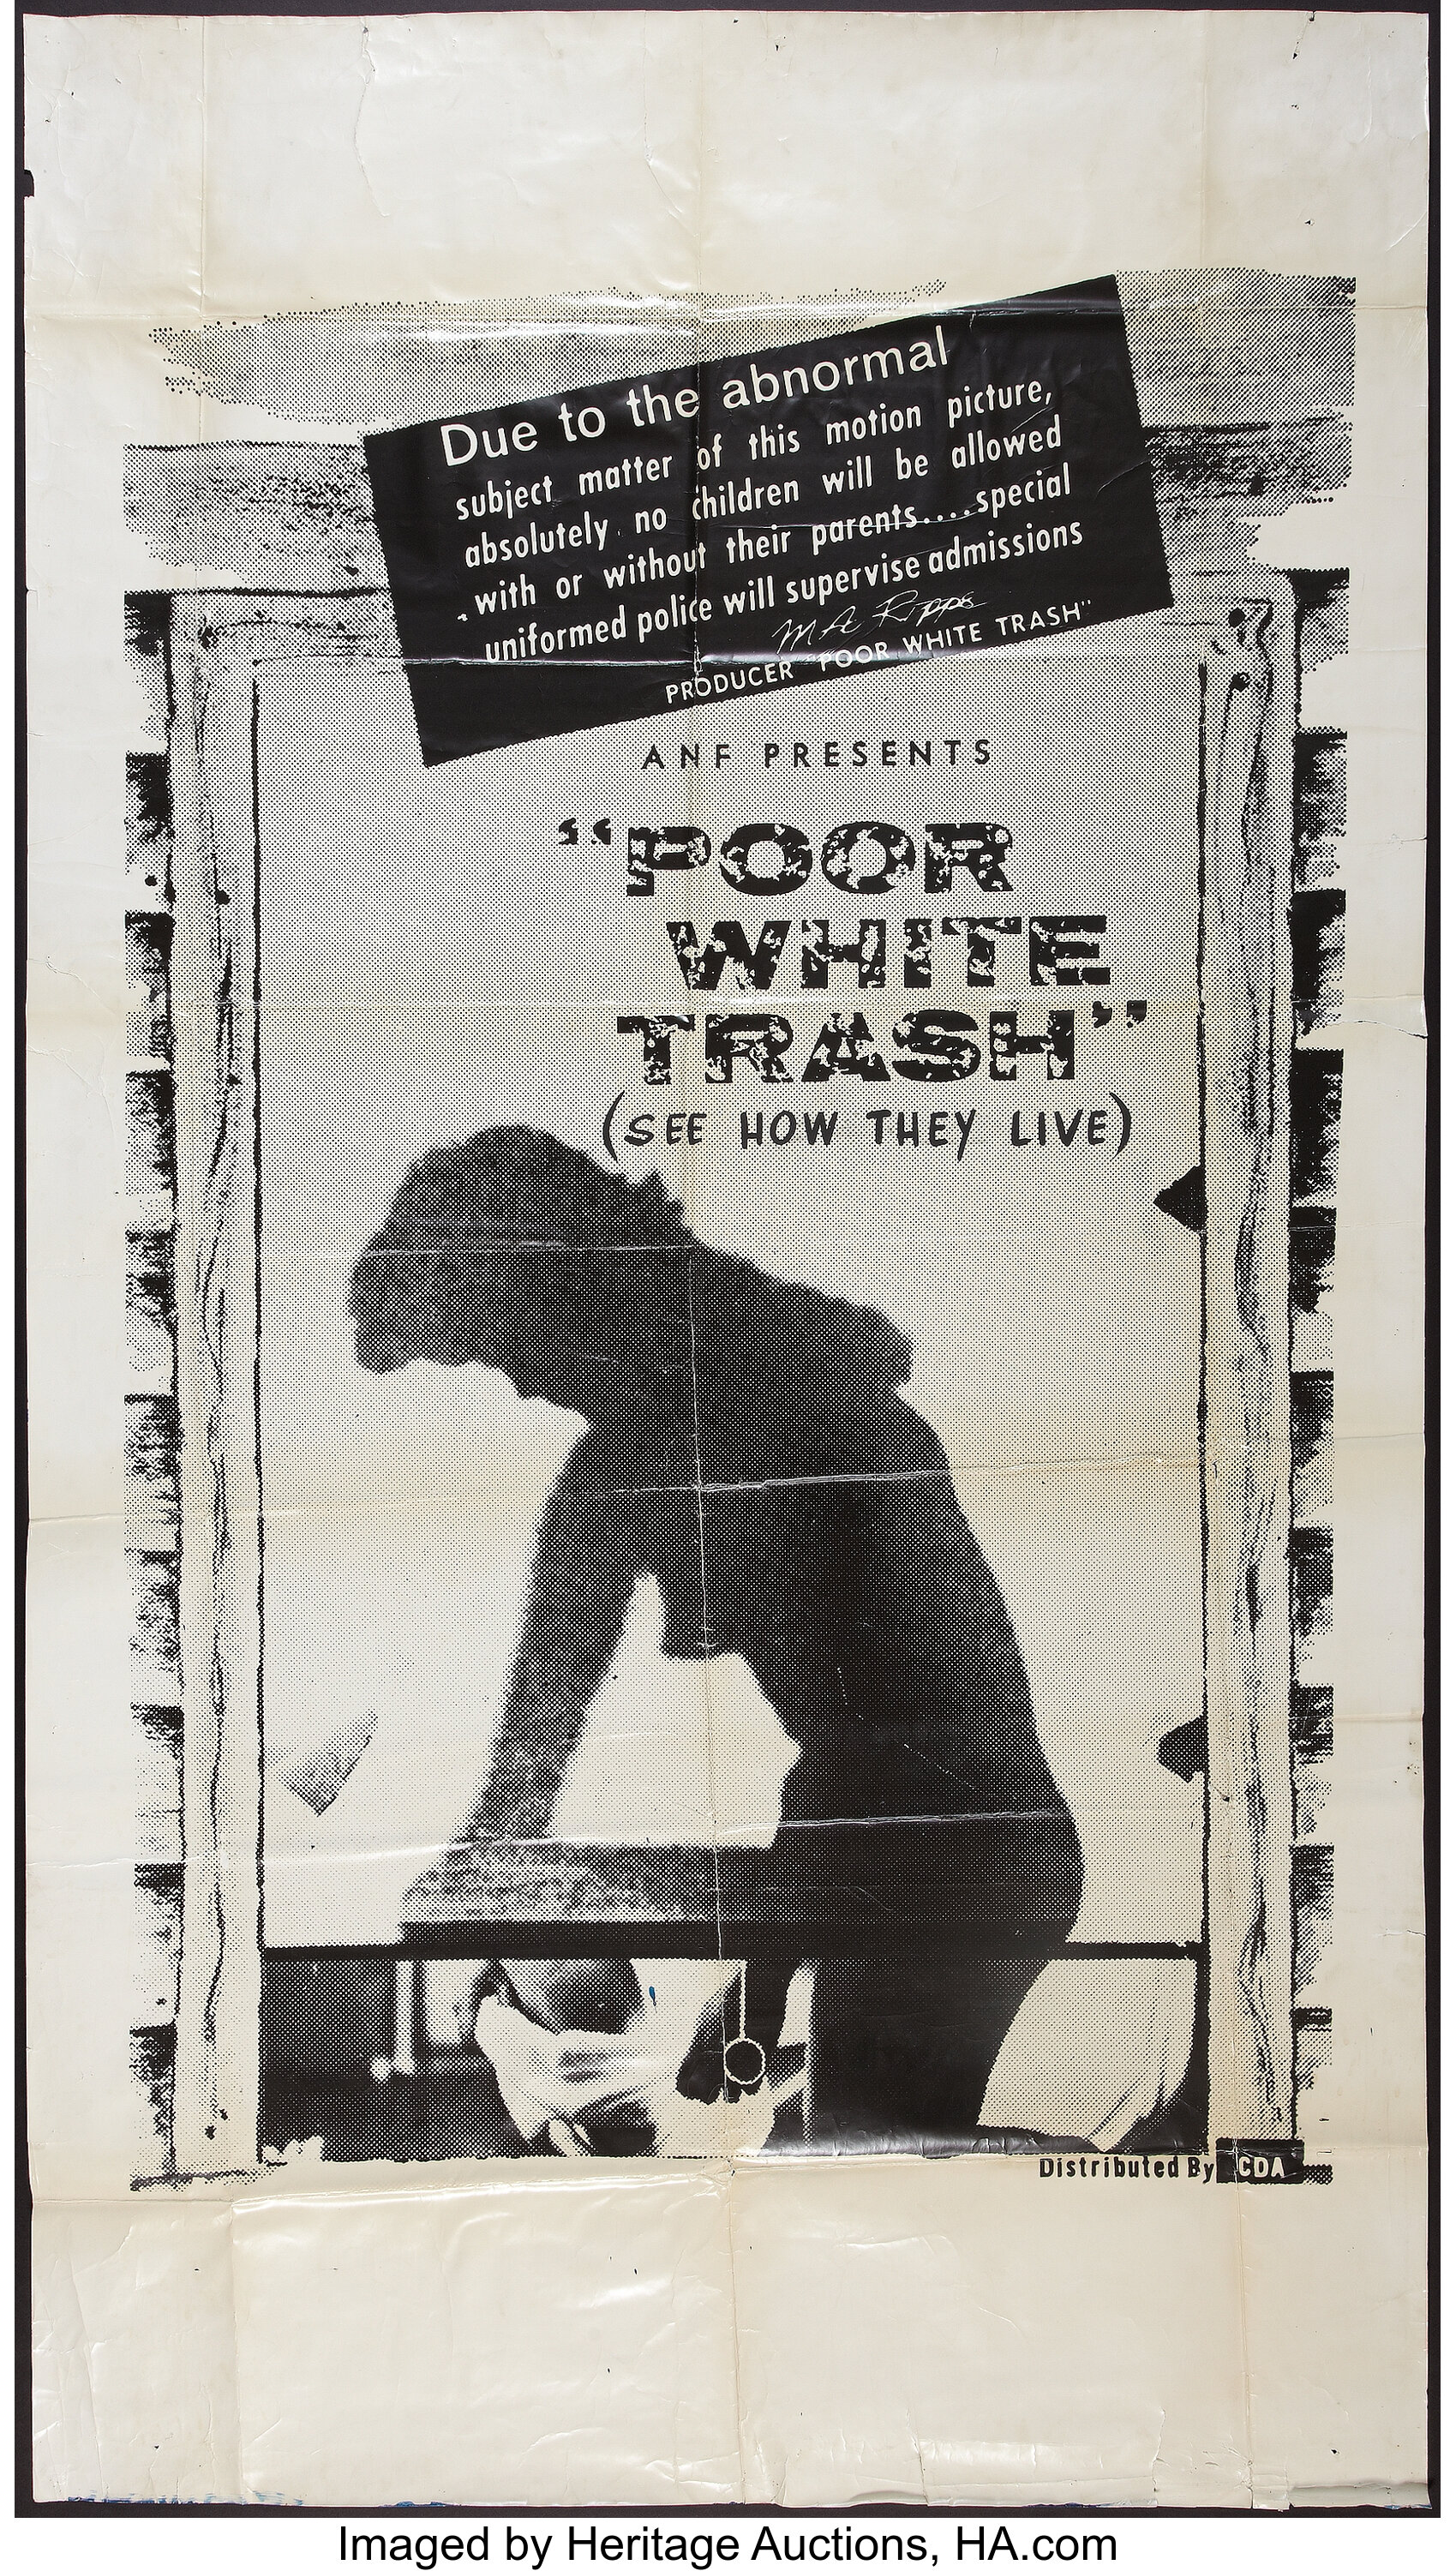 Poor White Trash – Poster Museum